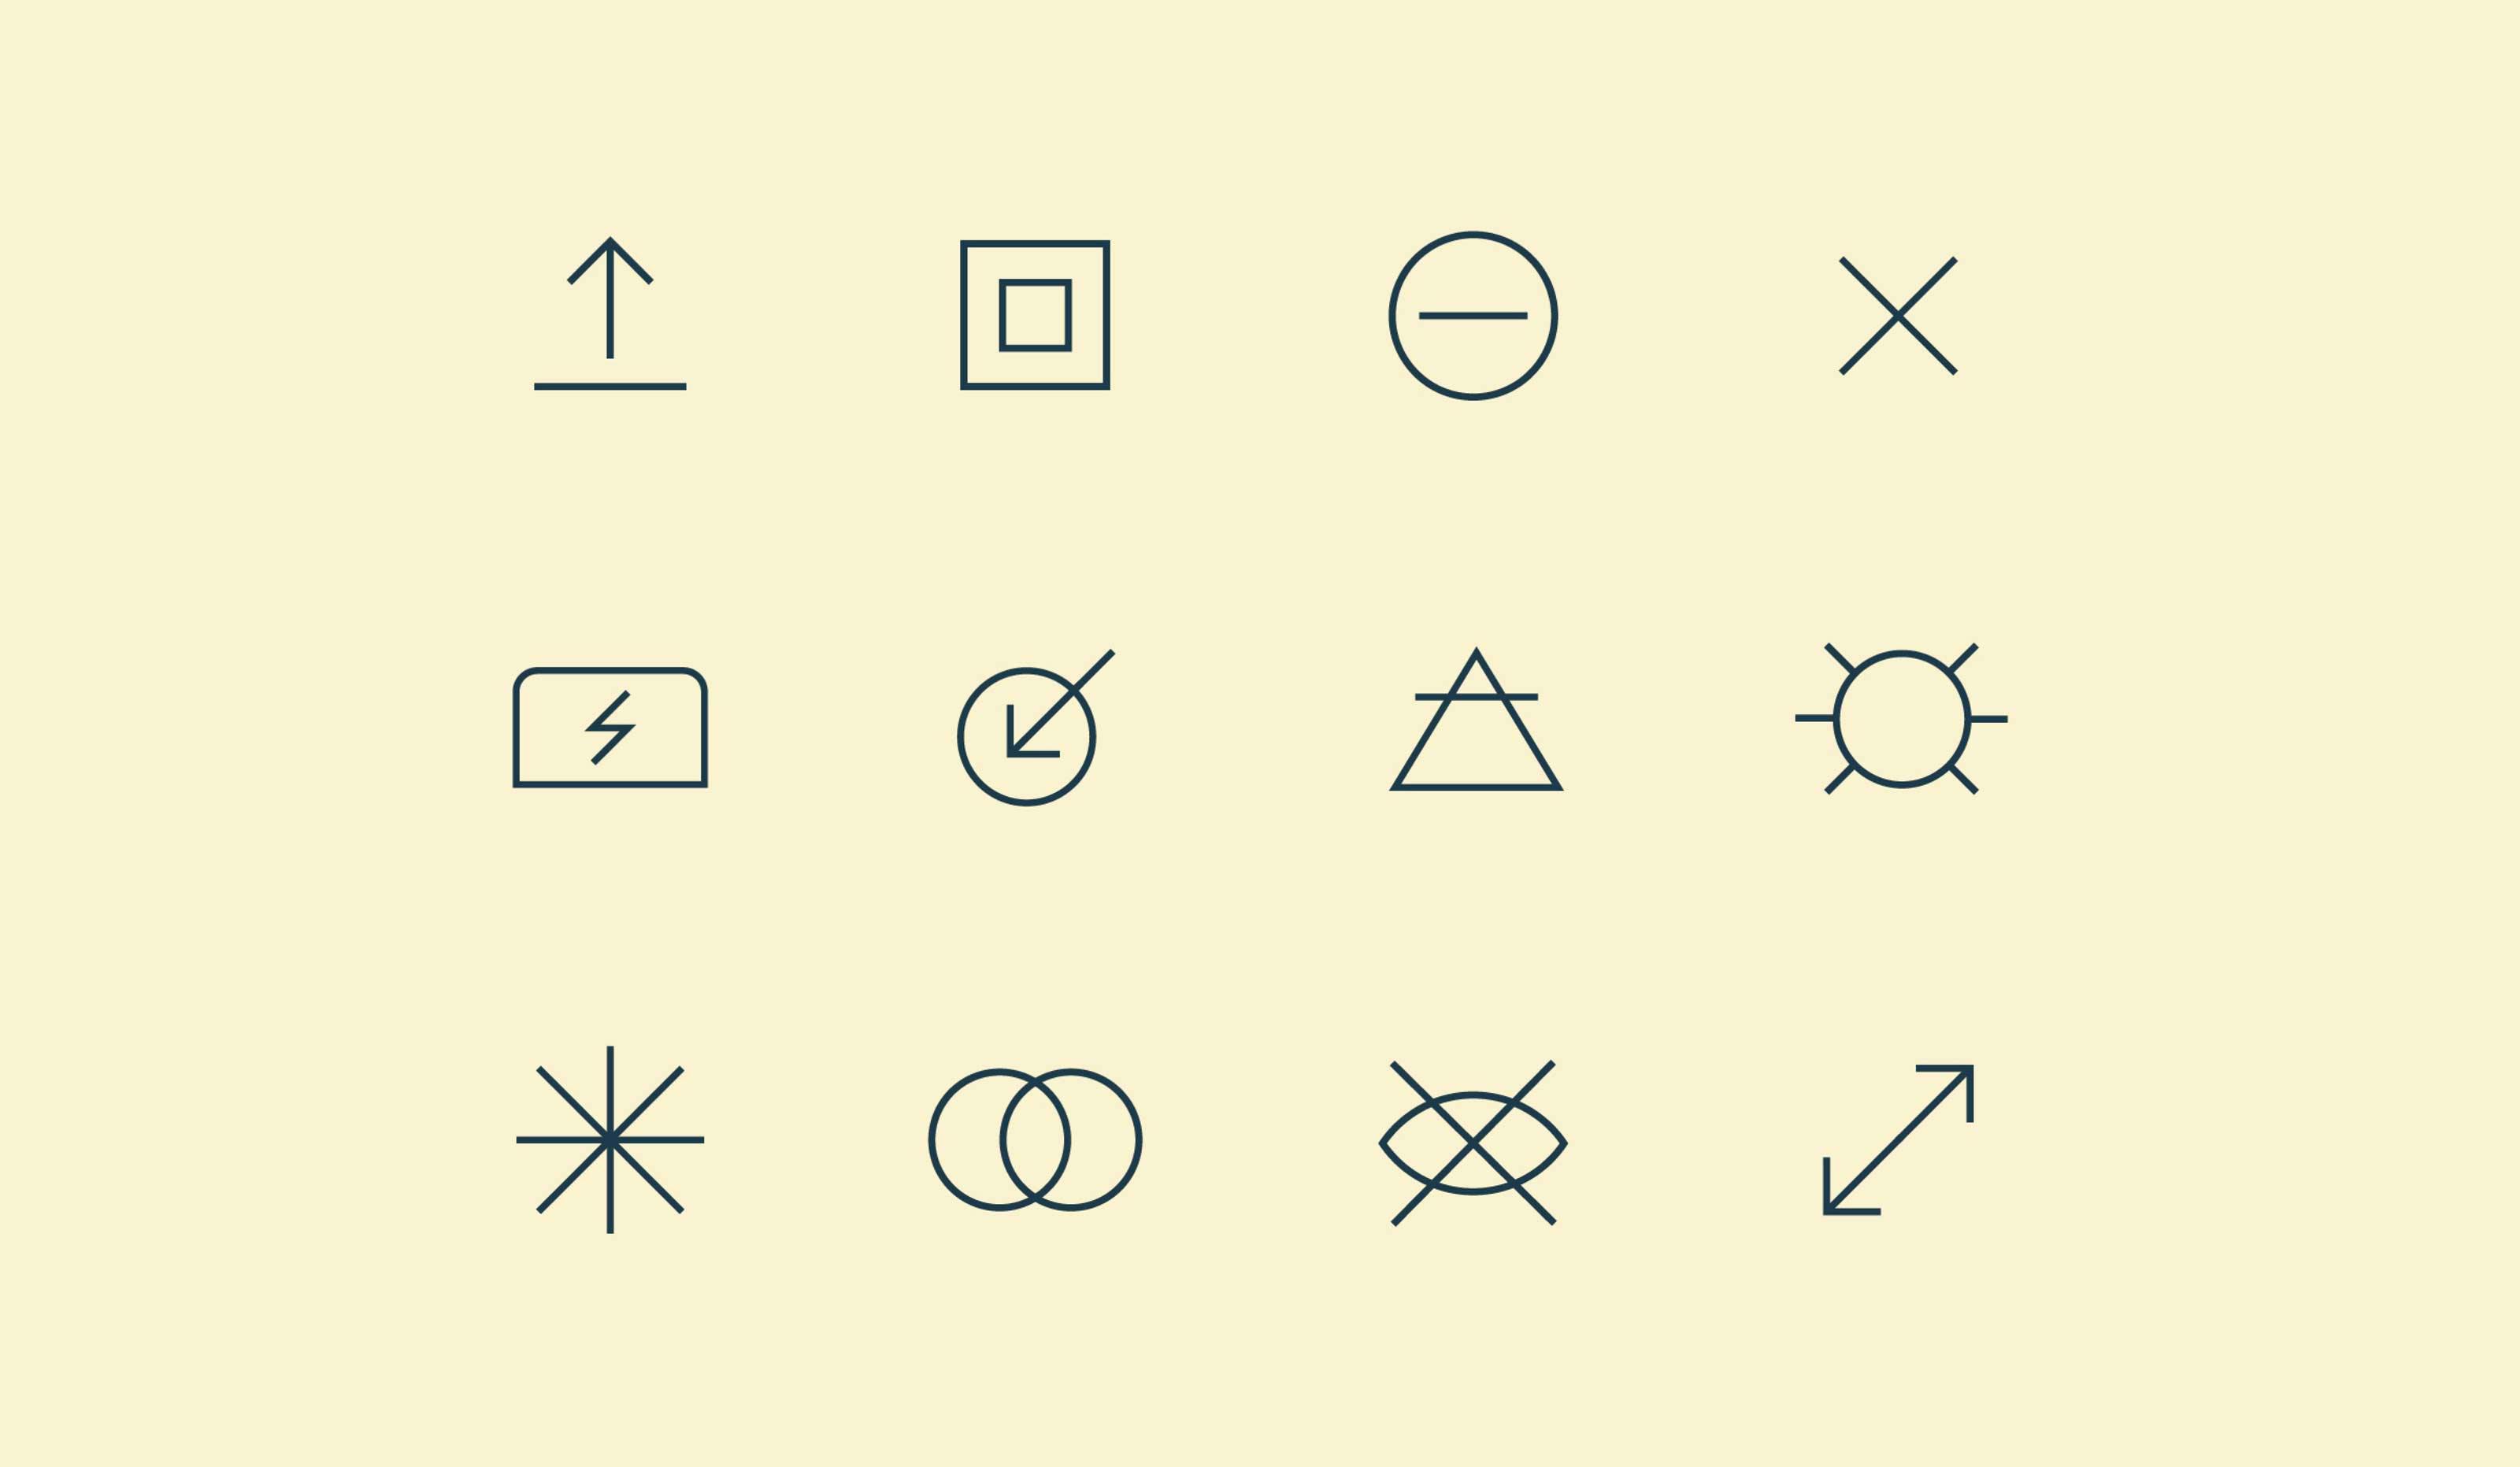 Icons-make-of-thin-lines-and-geometric-shapes-for-brand-identity.jpg